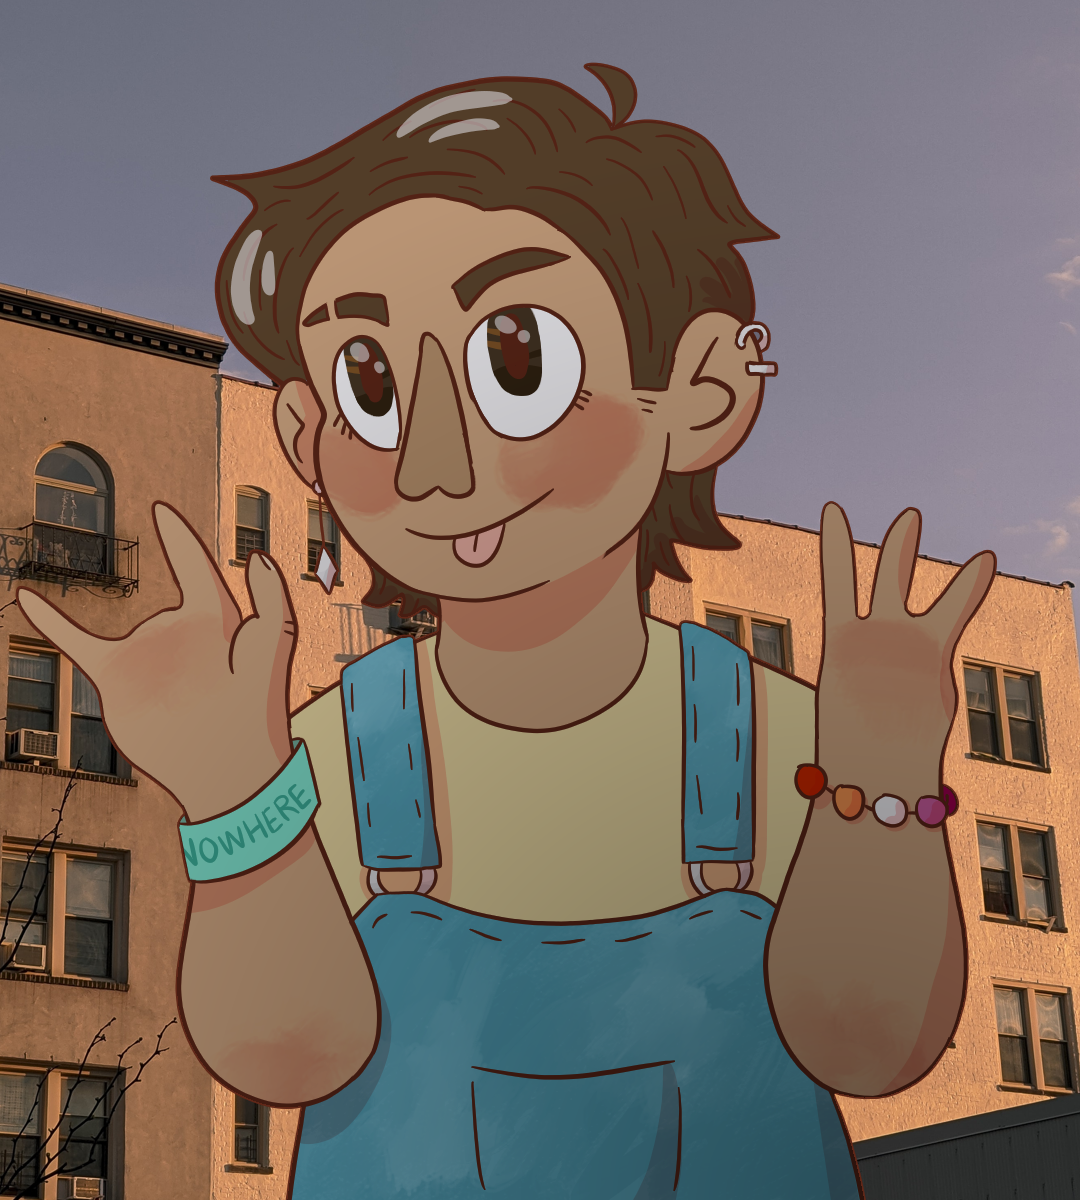 a tan-skinned person with chin-length hair and earrings stands in front of an apartment complex. they are sticking their tongue out and holding their hands up. they have only three fingers on each hand (symbrachydactyly). they're wearing overalls and a lesbian pride bracelet.